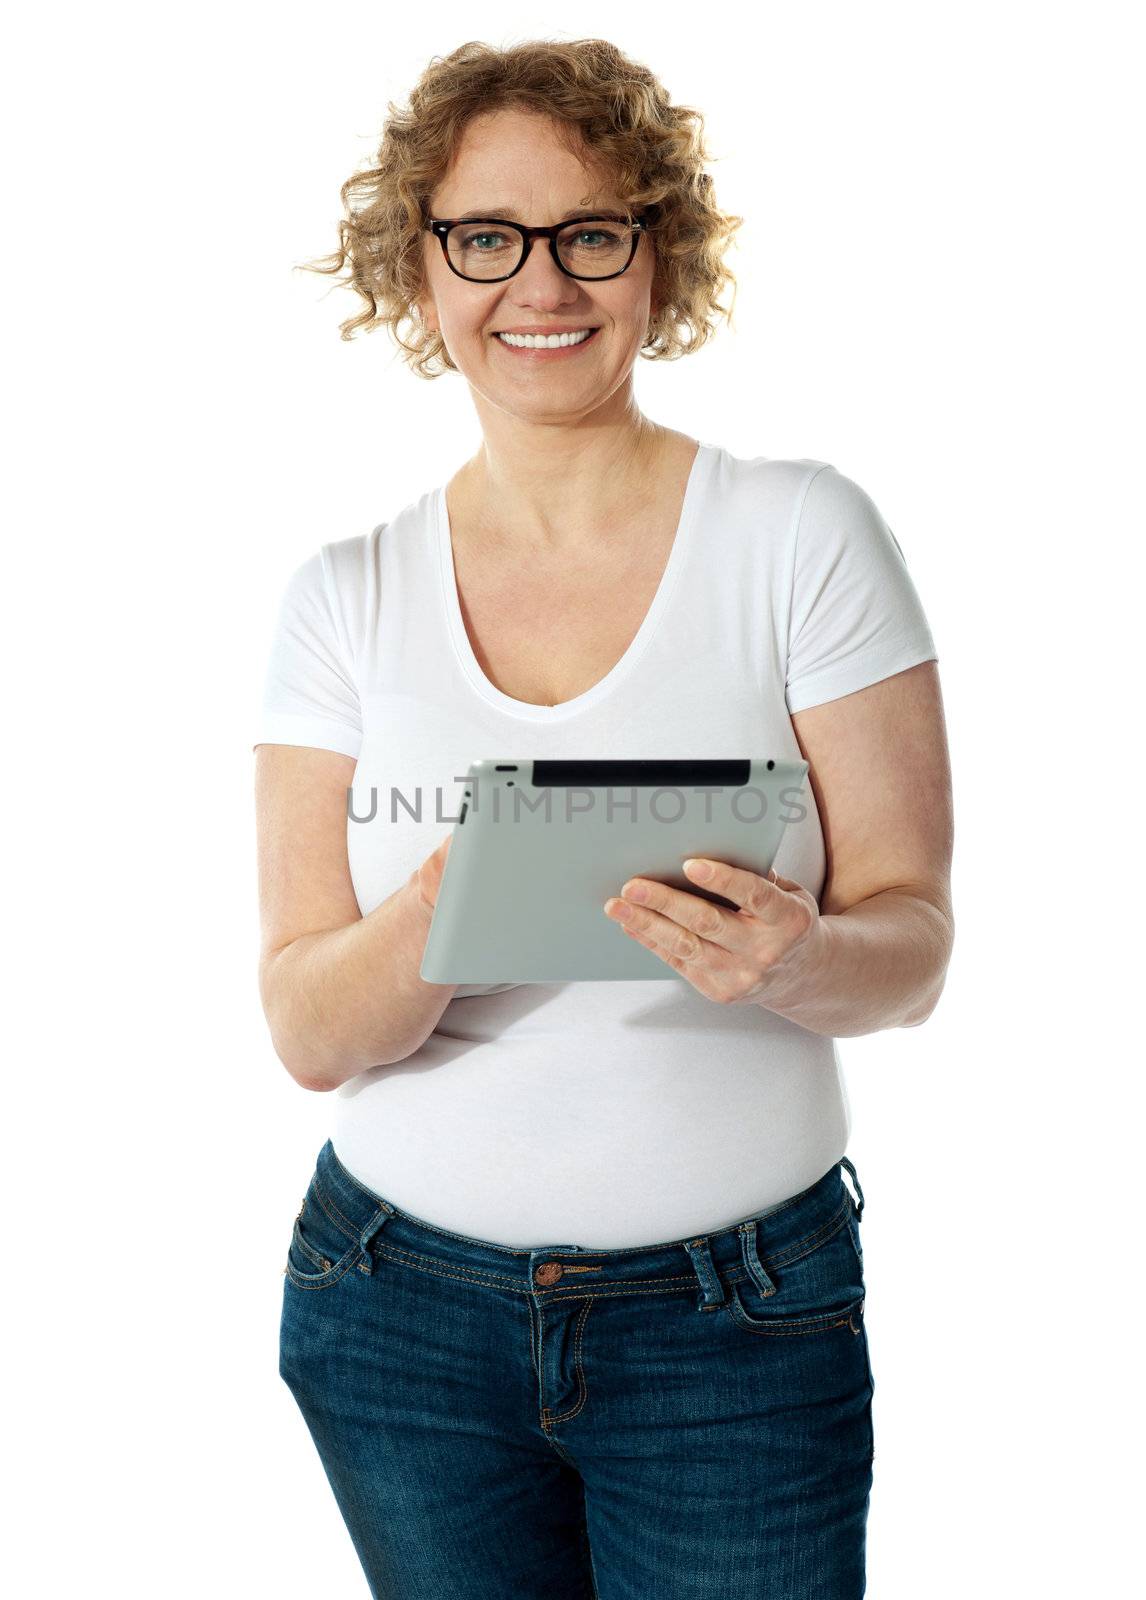 Senior woman holding tablet, smiling by stockyimages